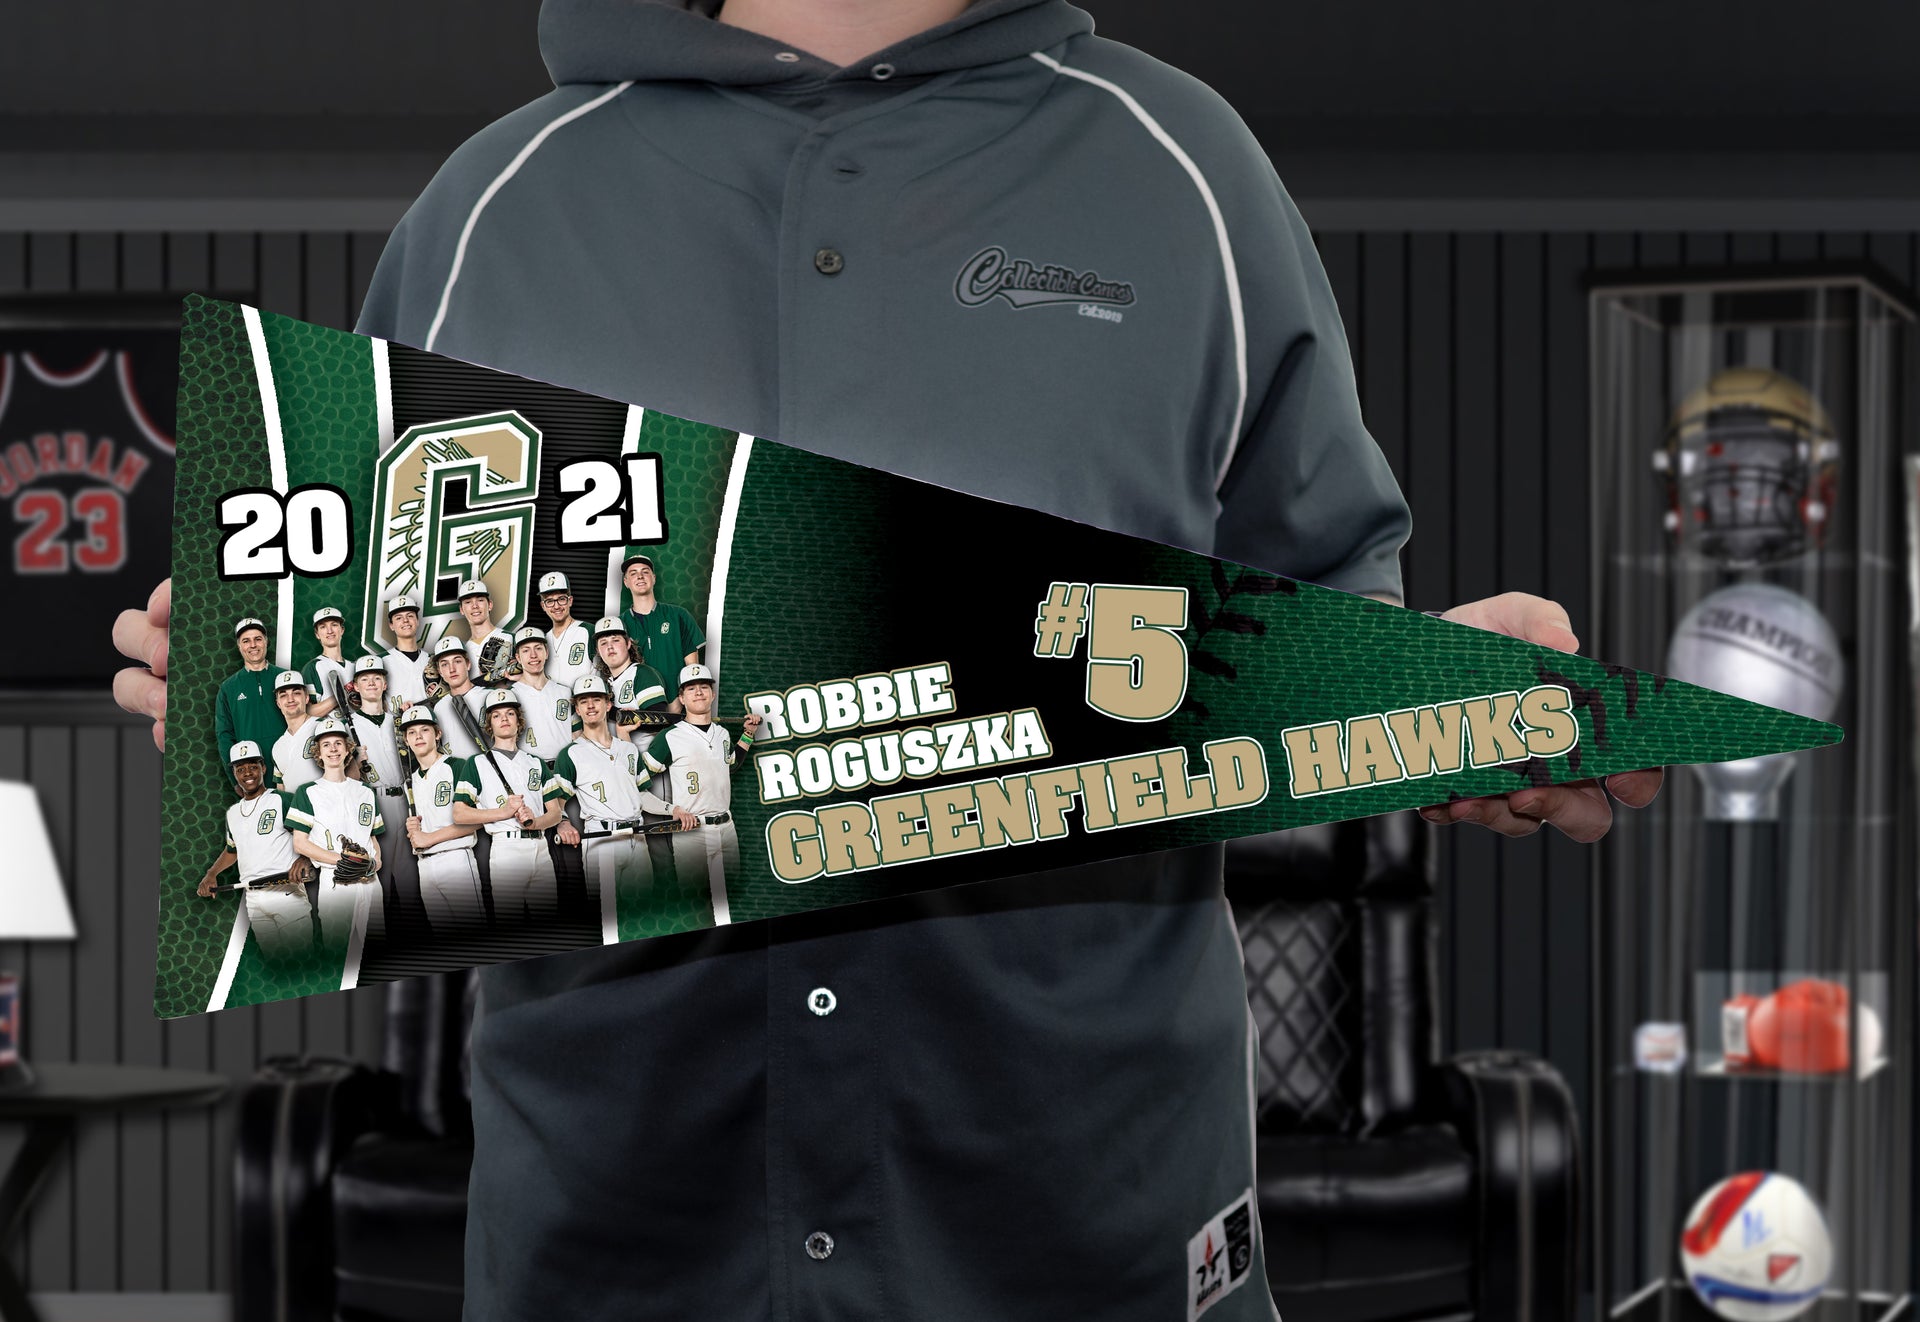 Held Collectible Canvas Sport Seams Template for Greenfield Hawks Baseball